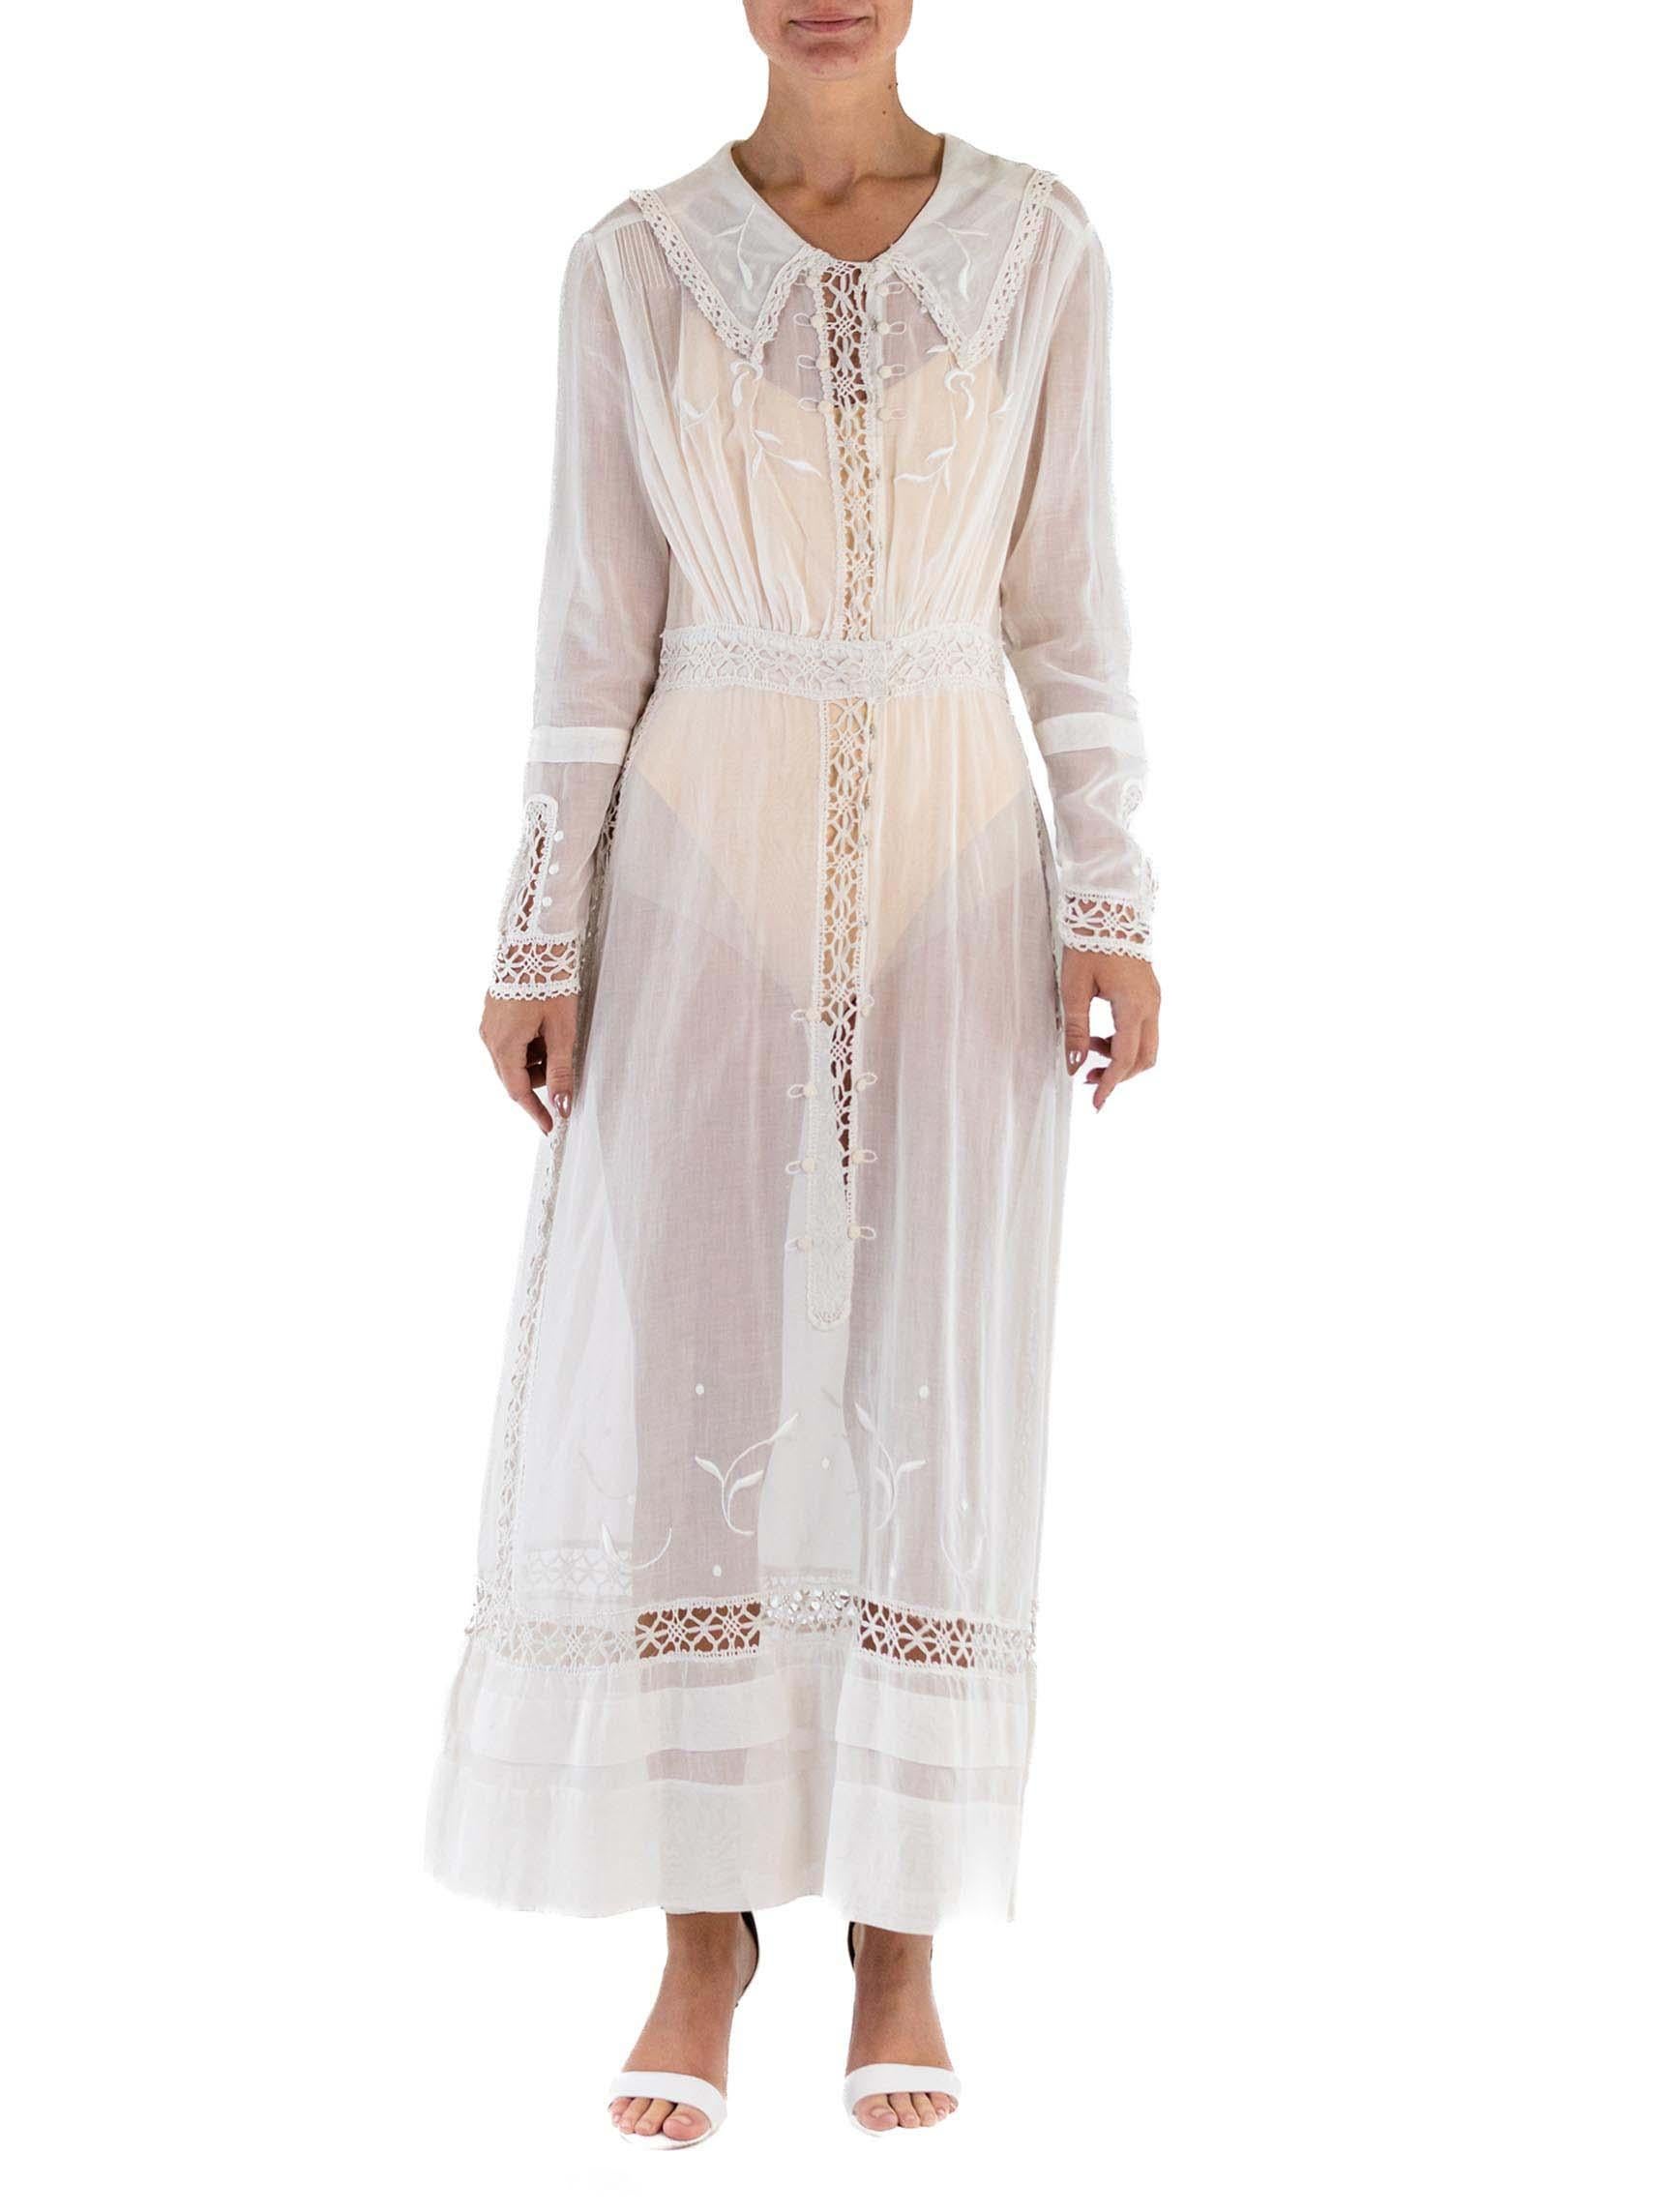 Women's Edwardian White Organic Cotton Lace Sailor Collar Tea Dress With Sleeves For Sale